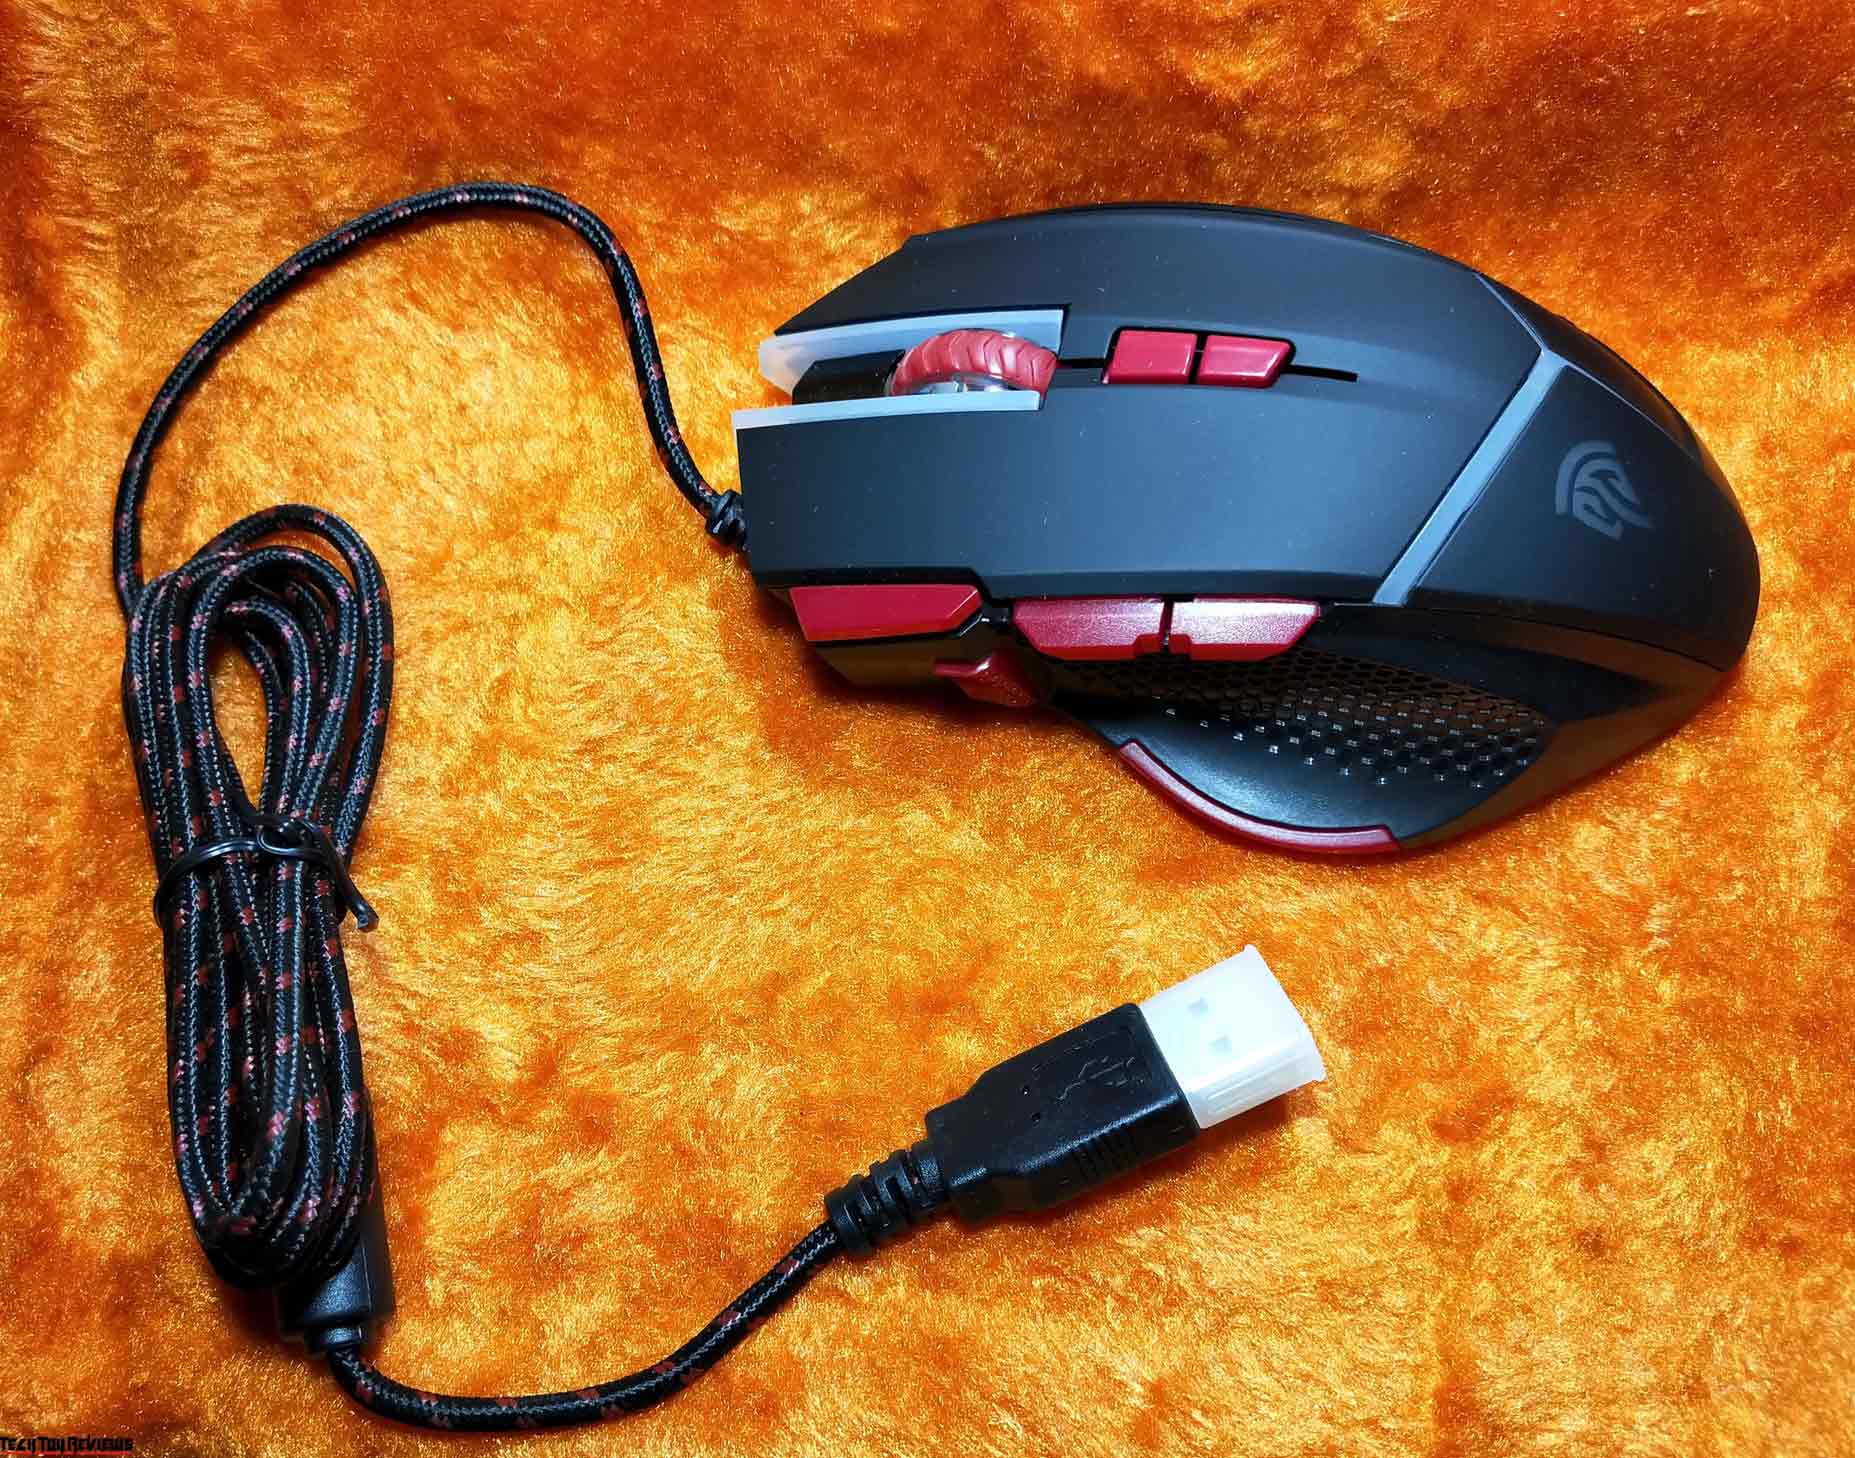 how to adjust etekcity gaming mouse light